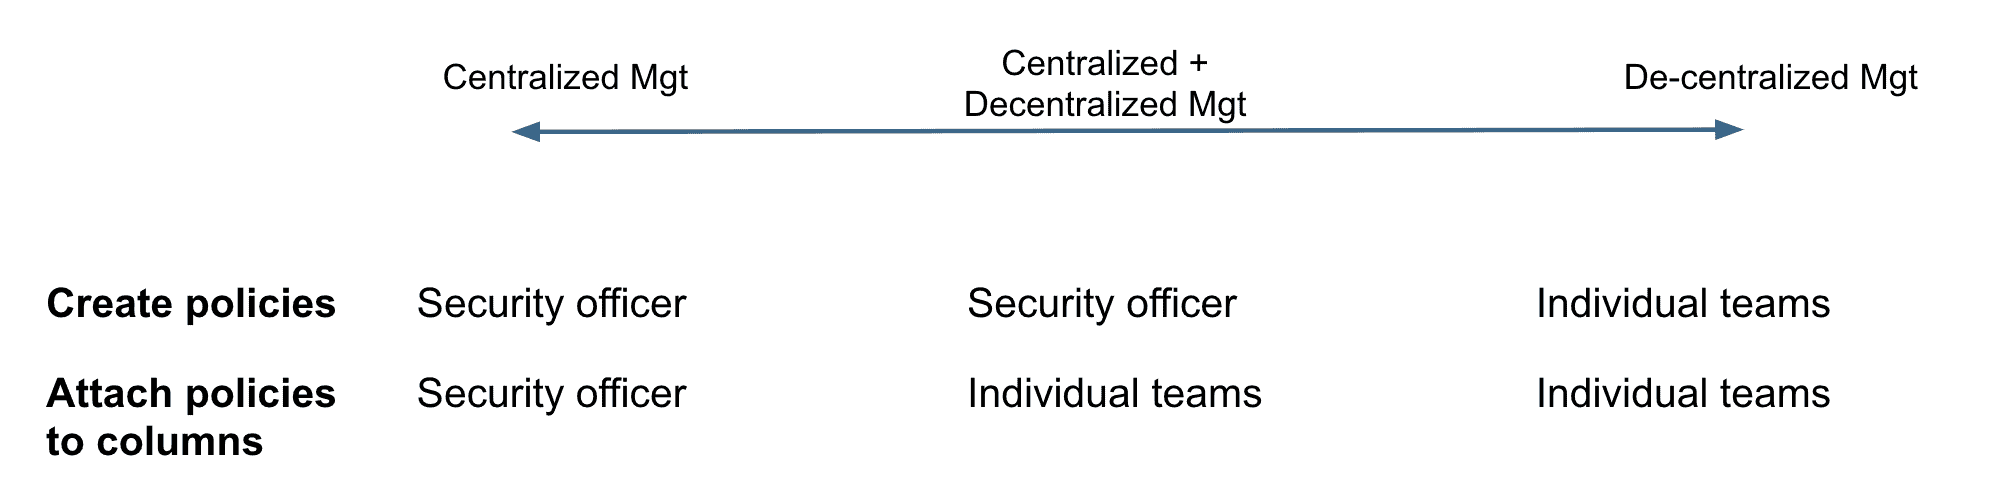 Centralized Mgmt